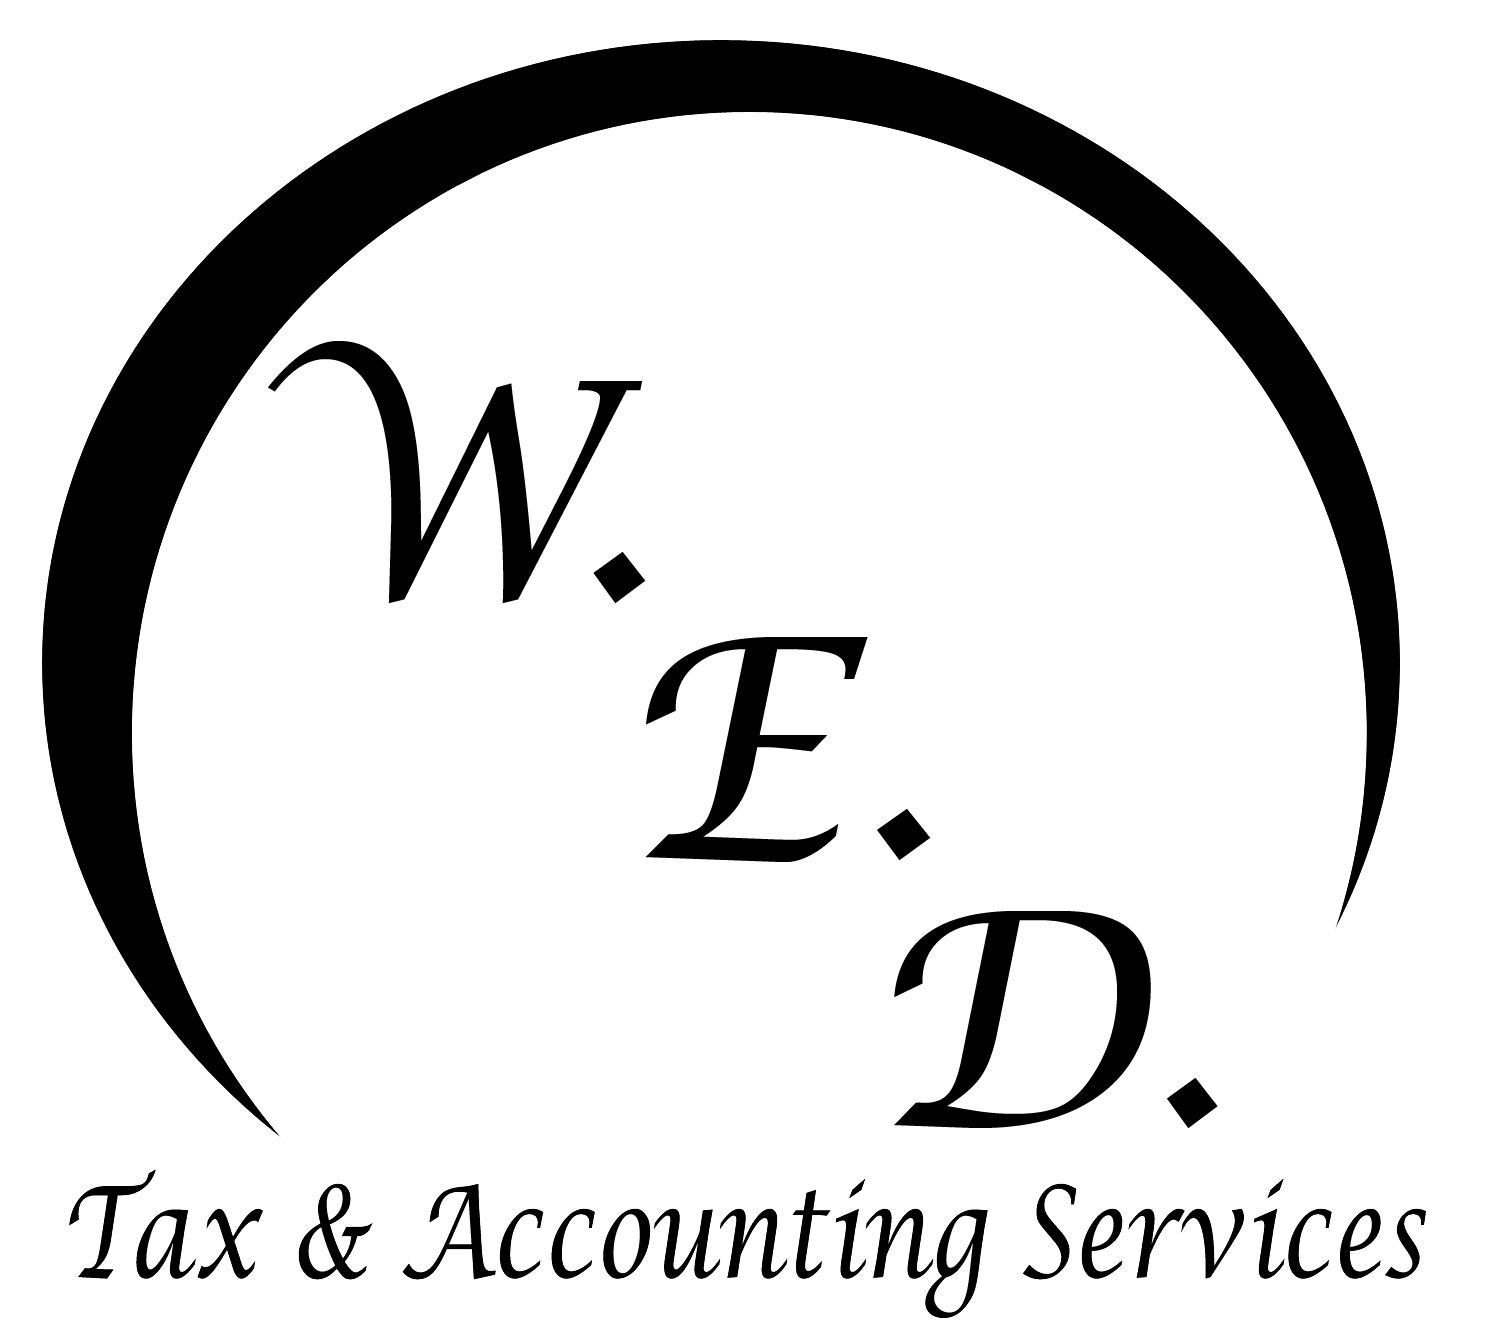 W.E.D. Tax & Accounting Services, Inc.